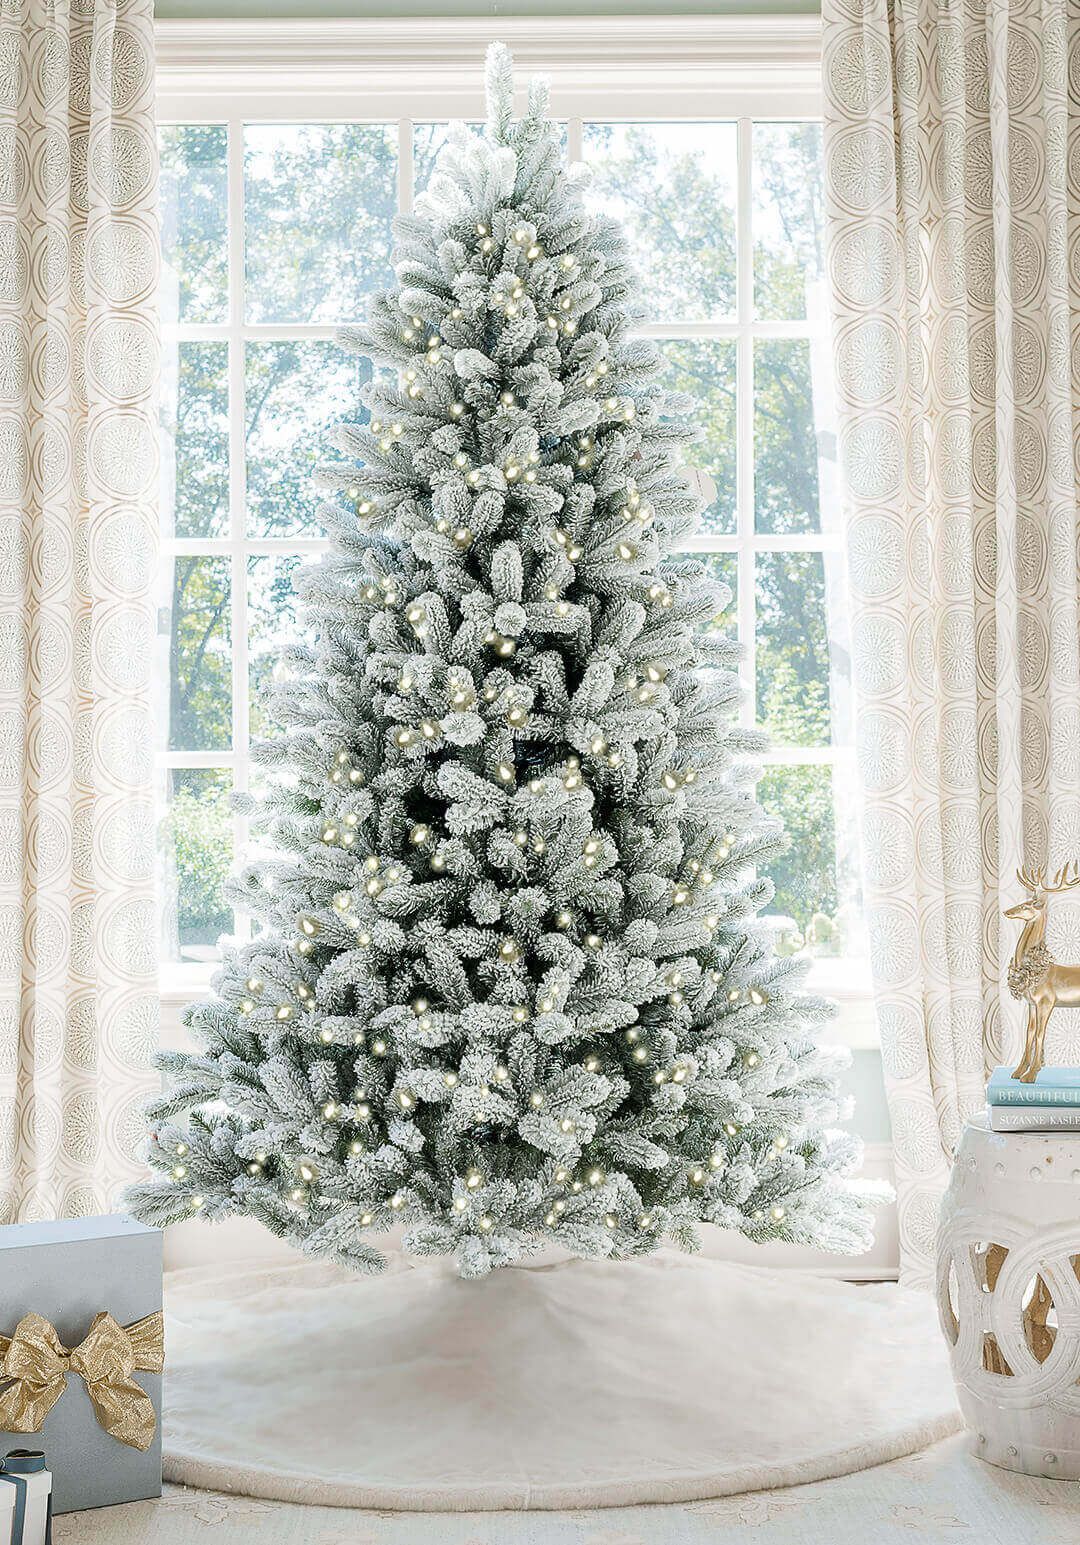 10' King Flock® Artificial Christmas Tree with 1250 Warm White LED Lights | King of Christmas